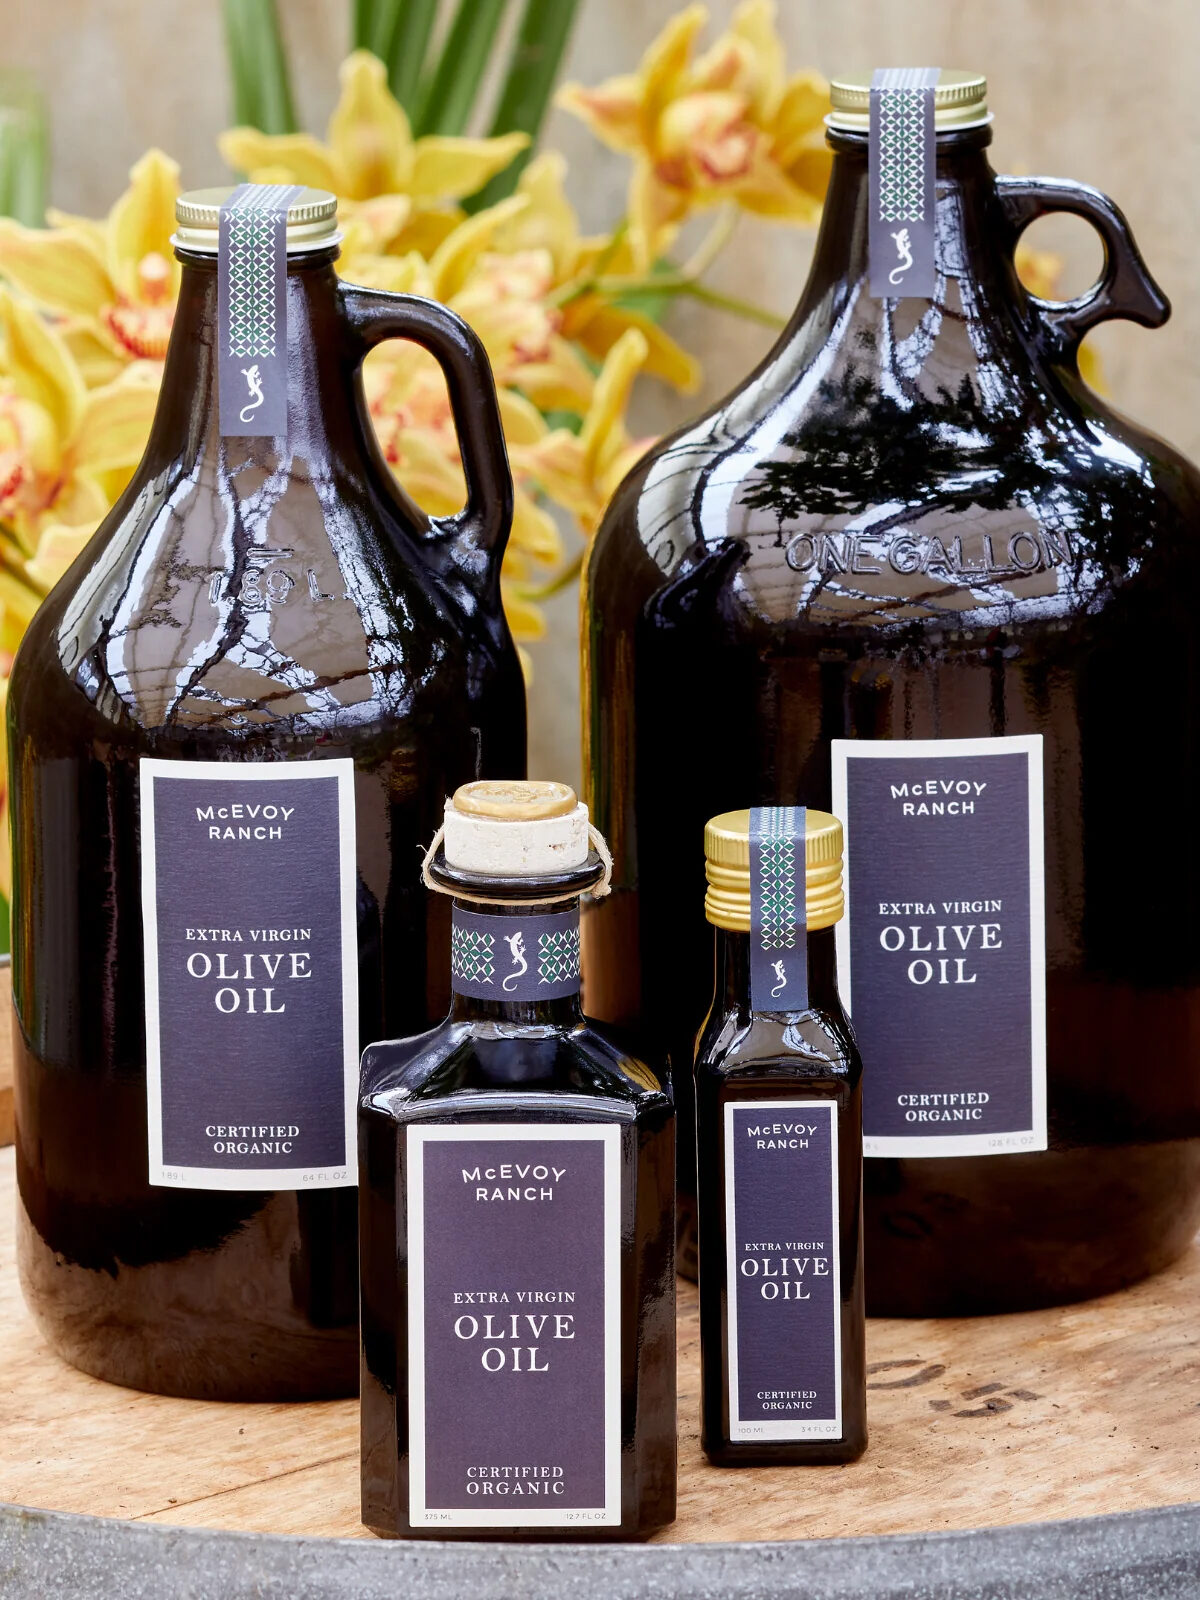 Olive oil from McEvoy Ranch